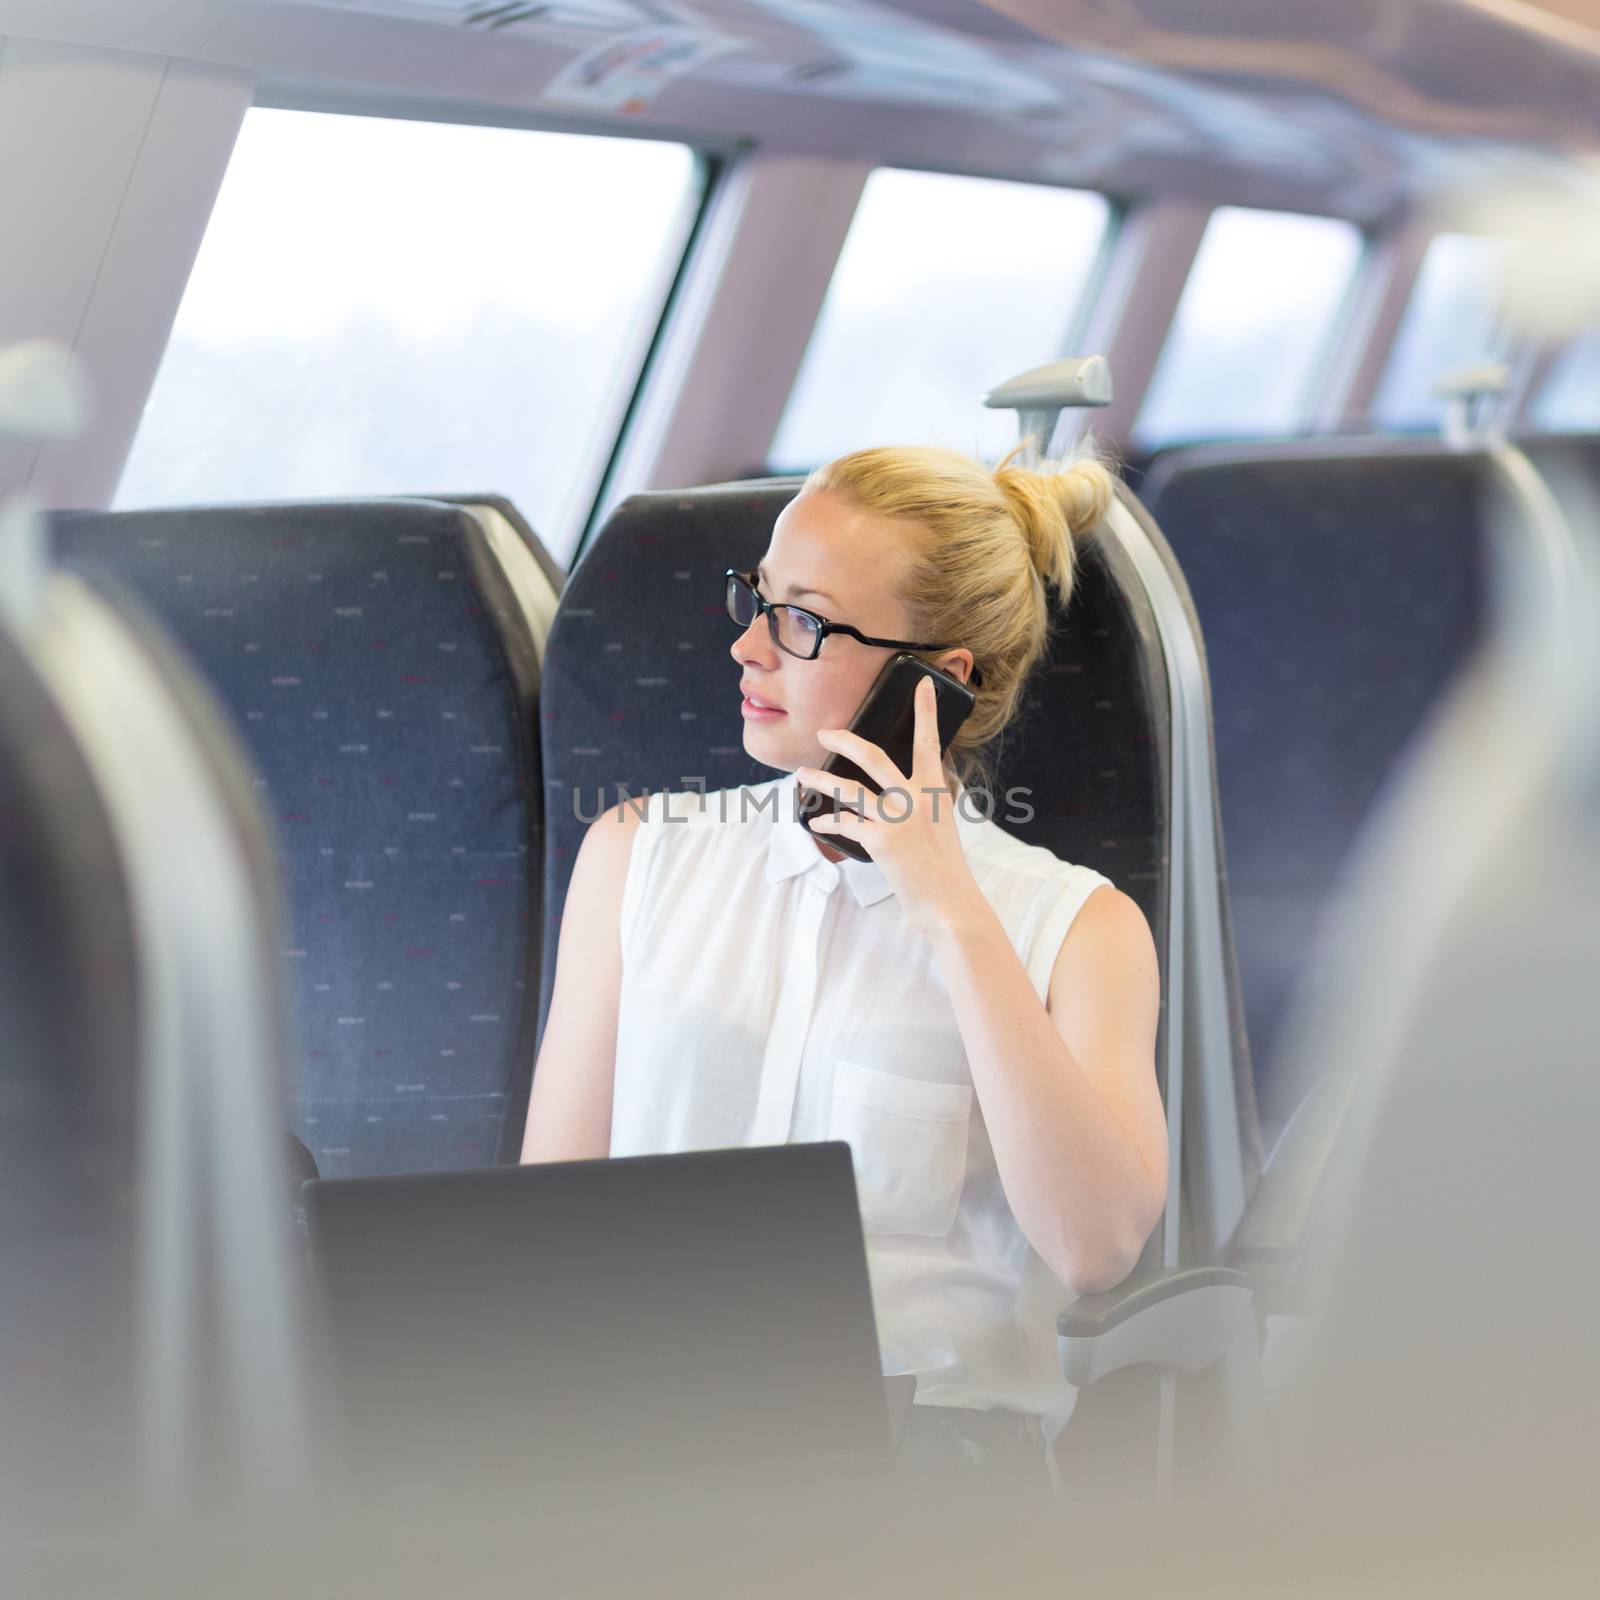 Businesswoman talking on cellphone and working on laptop while traveling by train. Business travel concept.